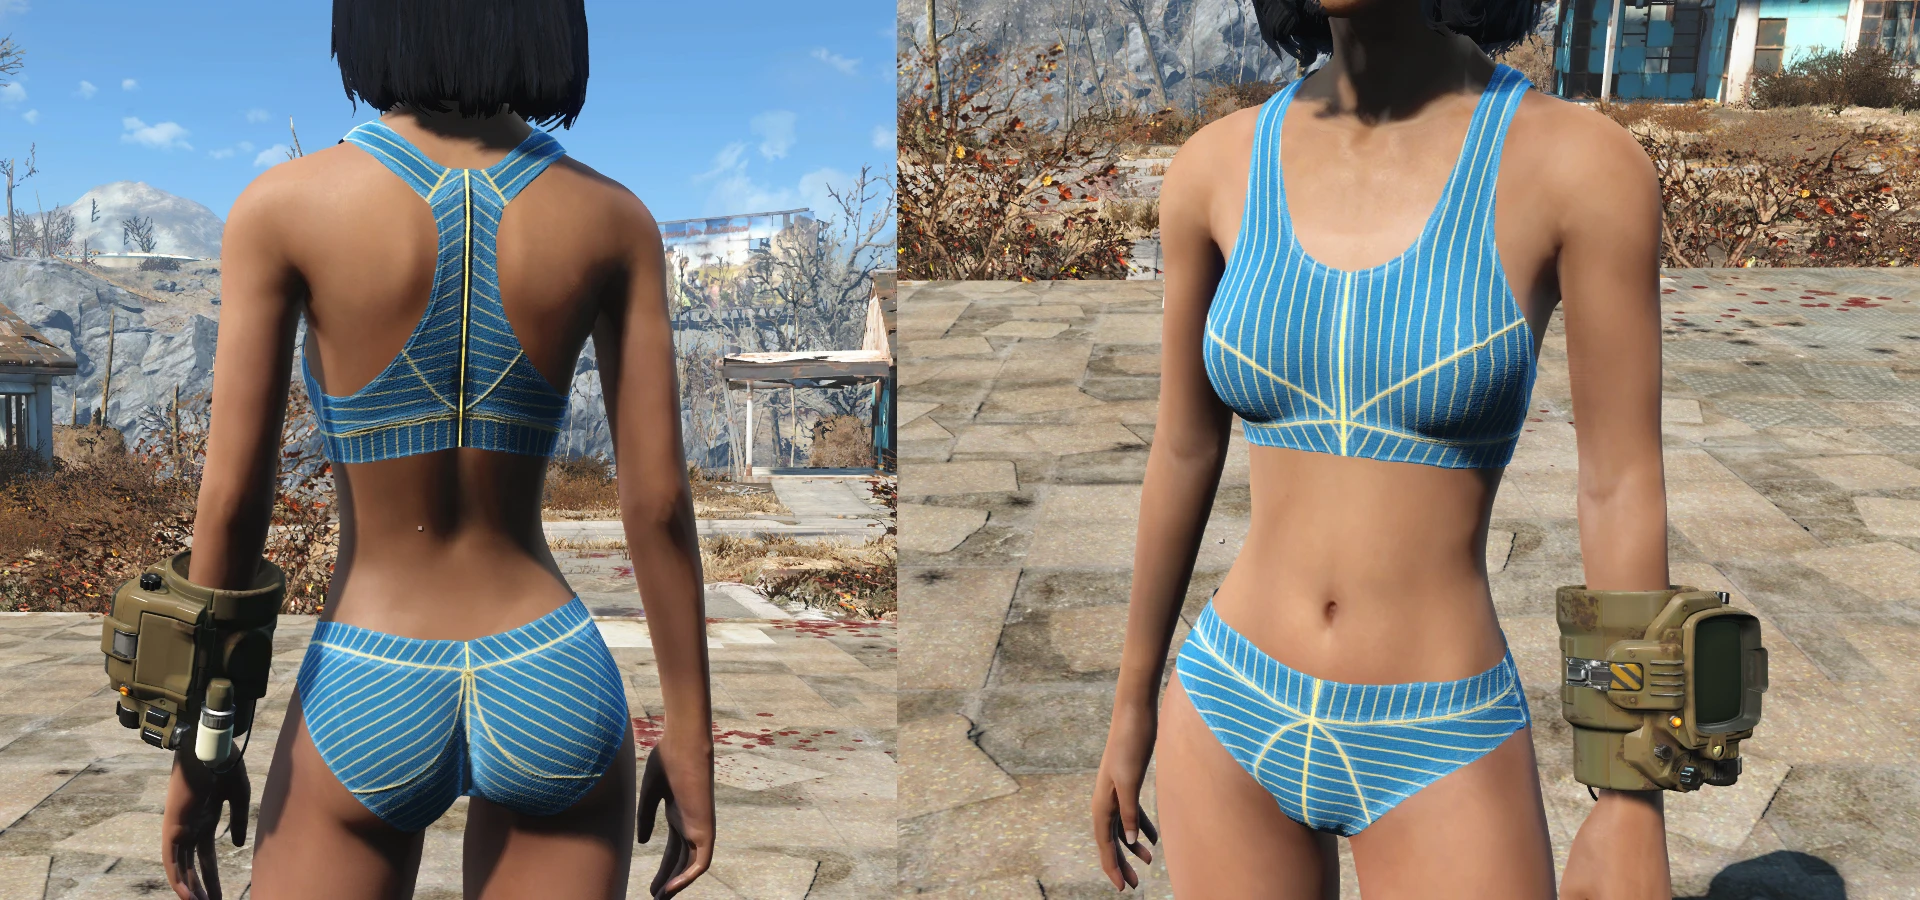 Fallout 4 Naked Mods Telegraph